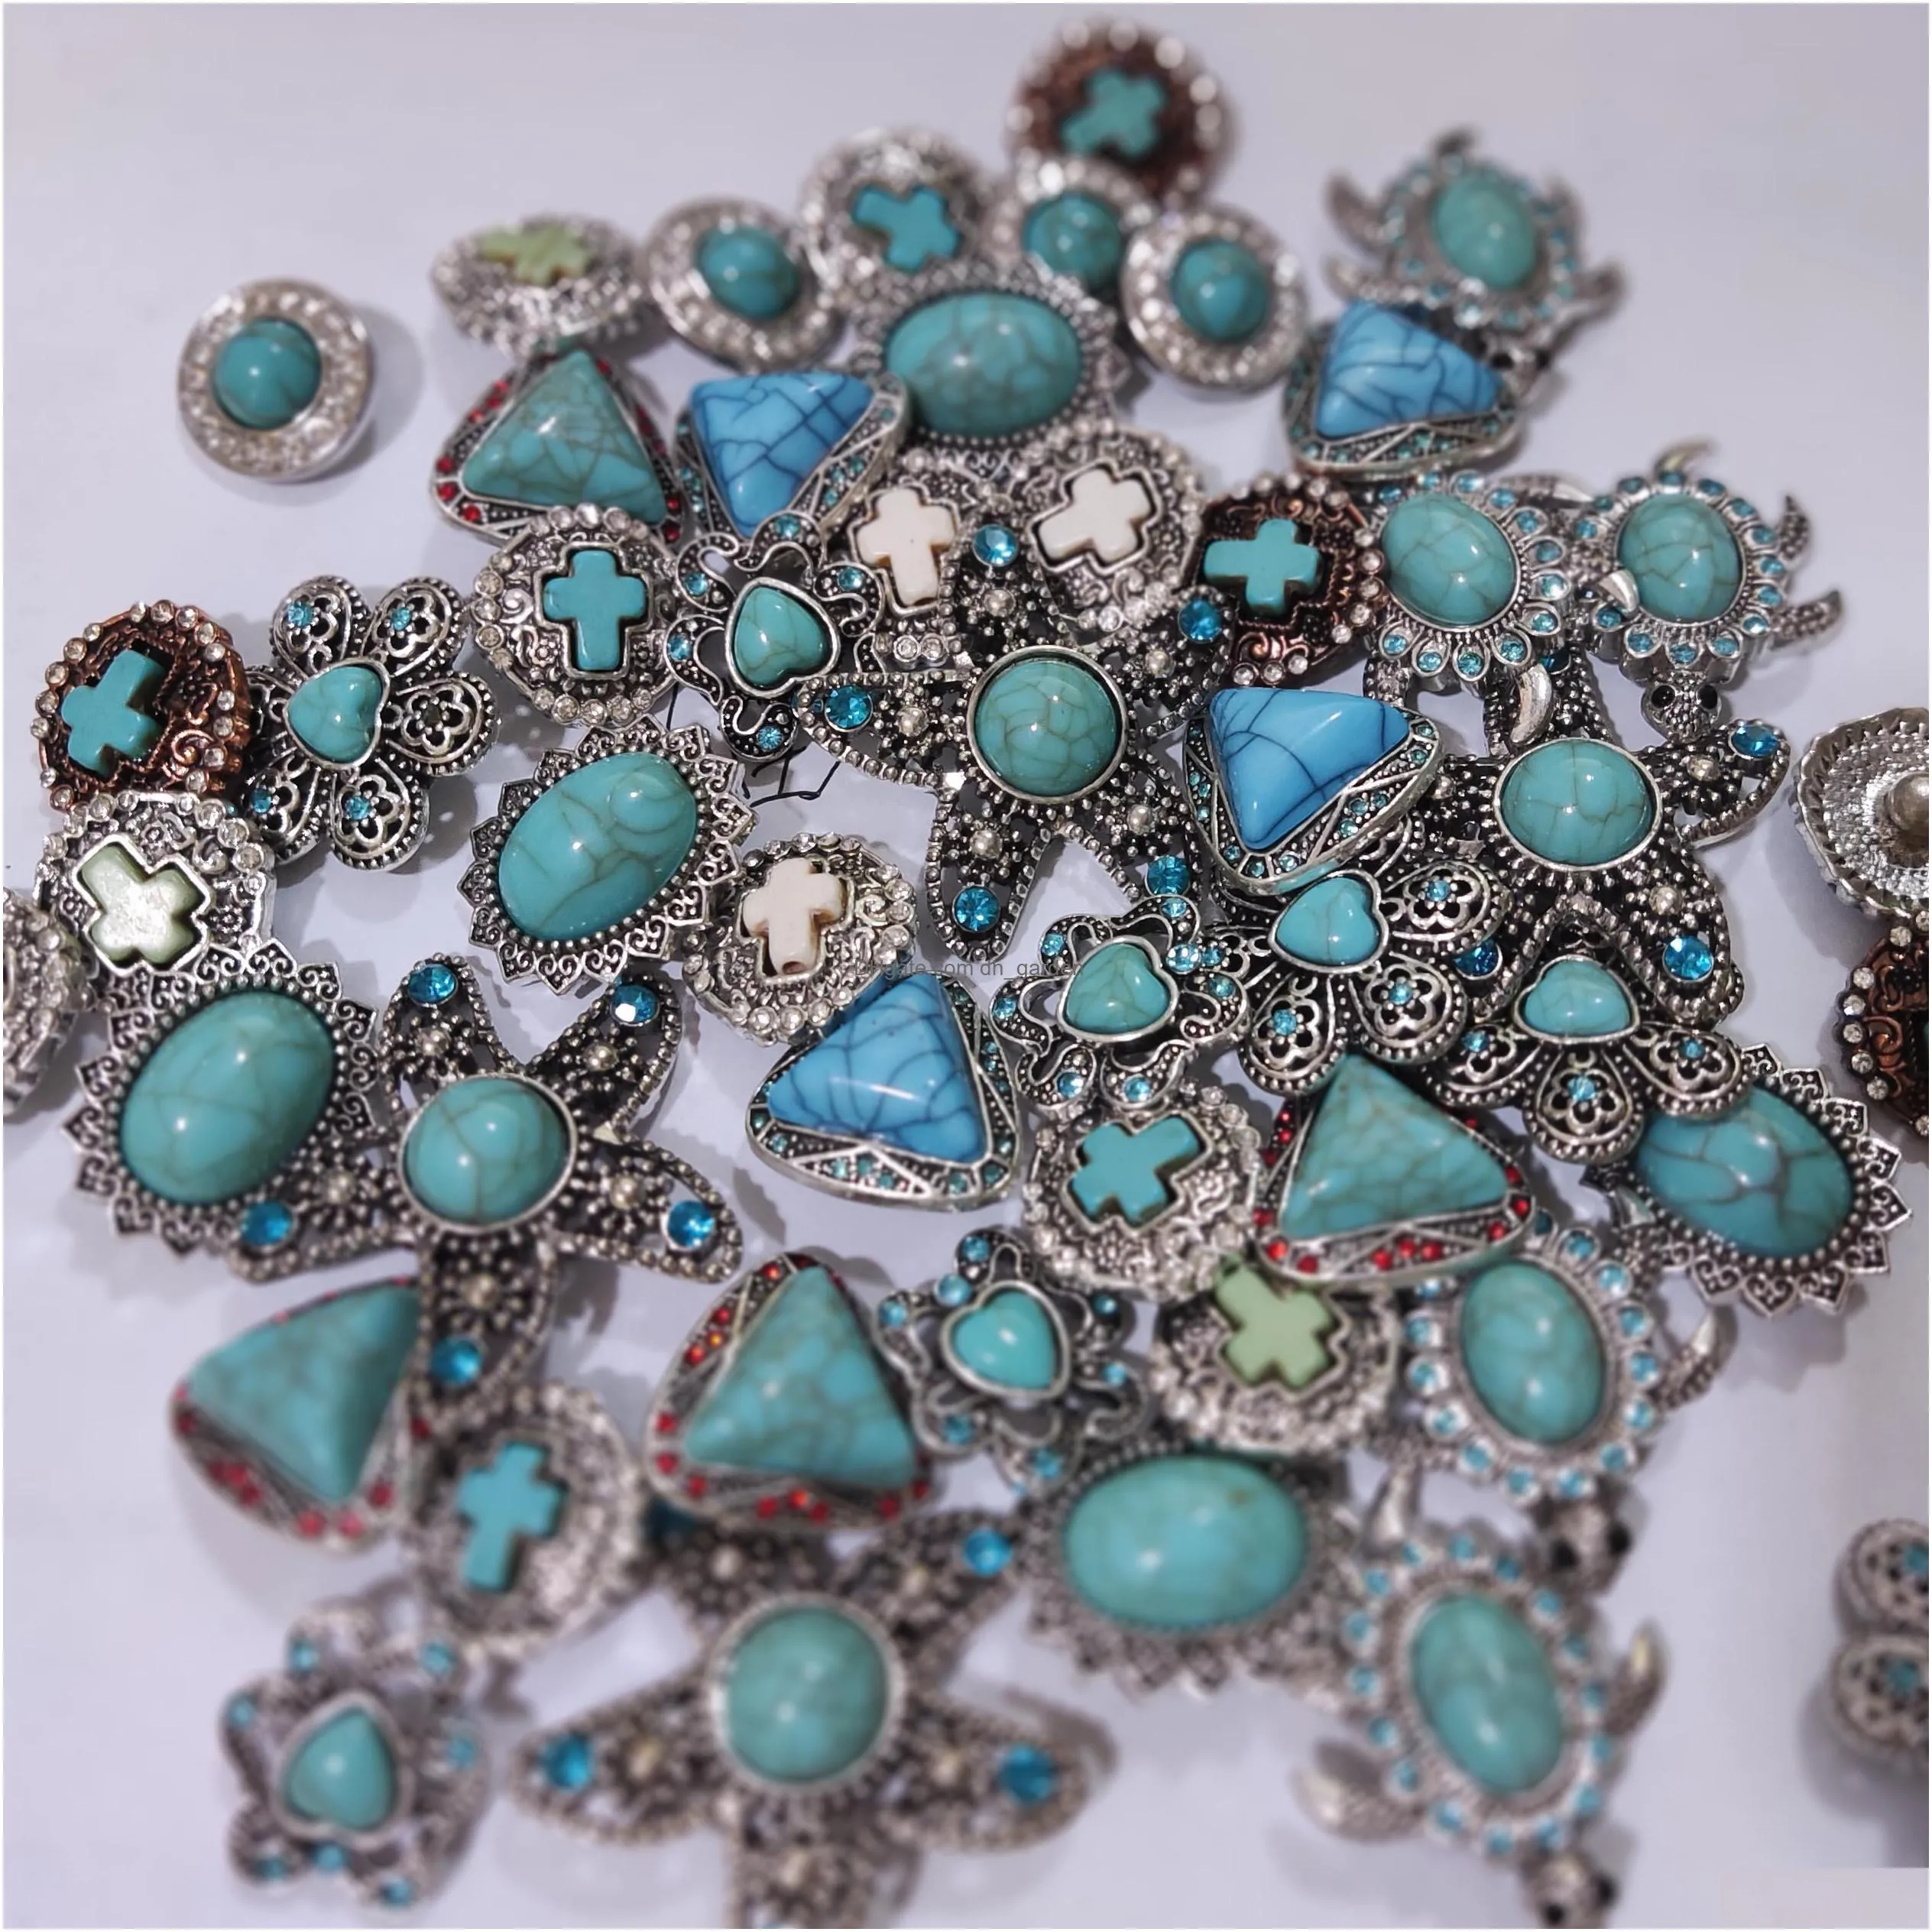 silver color turquoise paved alloy components 18mm snap button charms beads jewelry making diy necklace earrings bracelet supplier